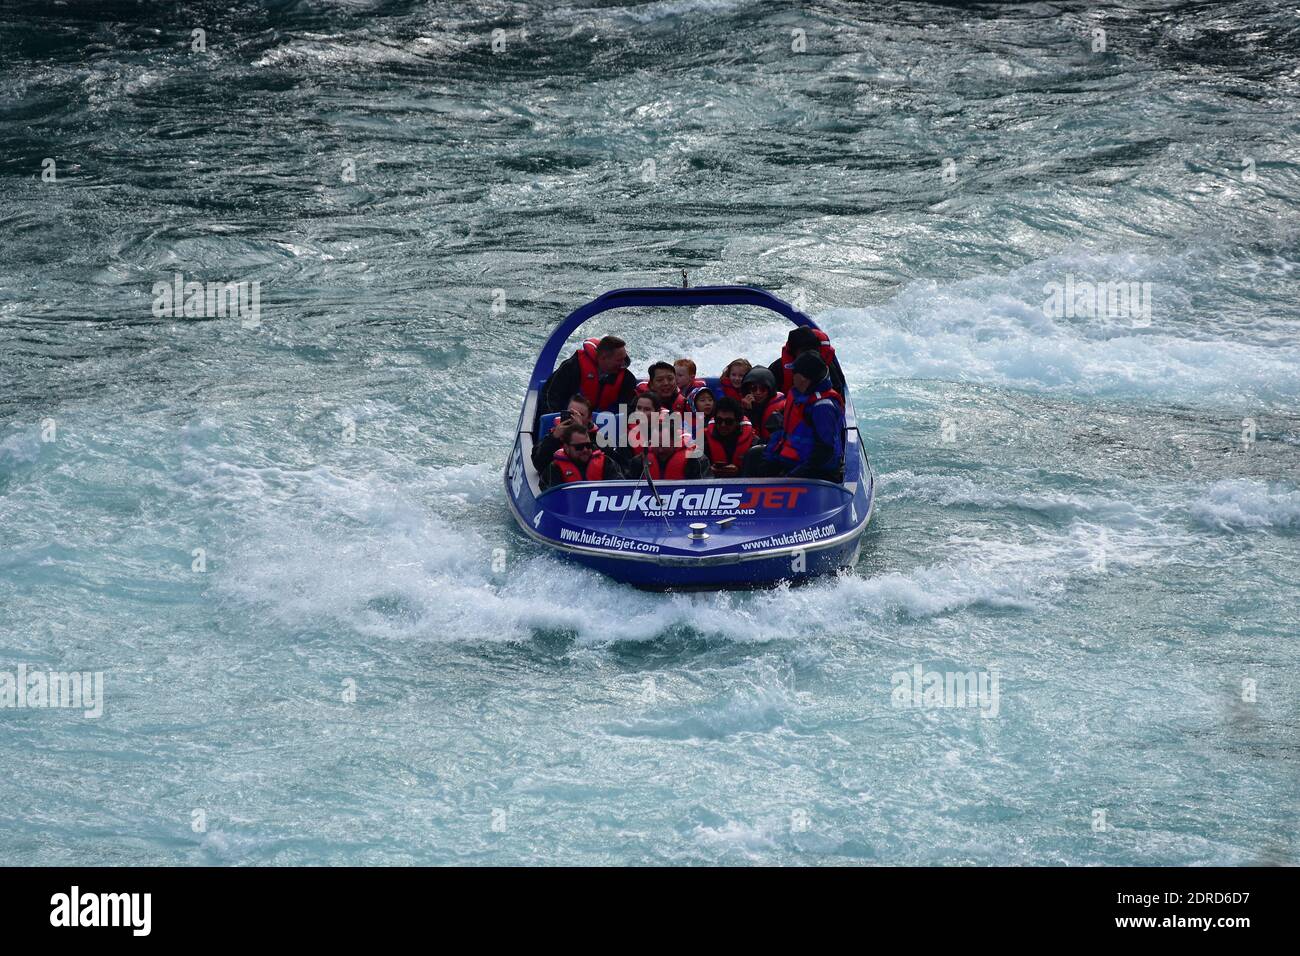 Front view of Huka Falls jet boat with tourists on board in fast moving water. Stock Photo